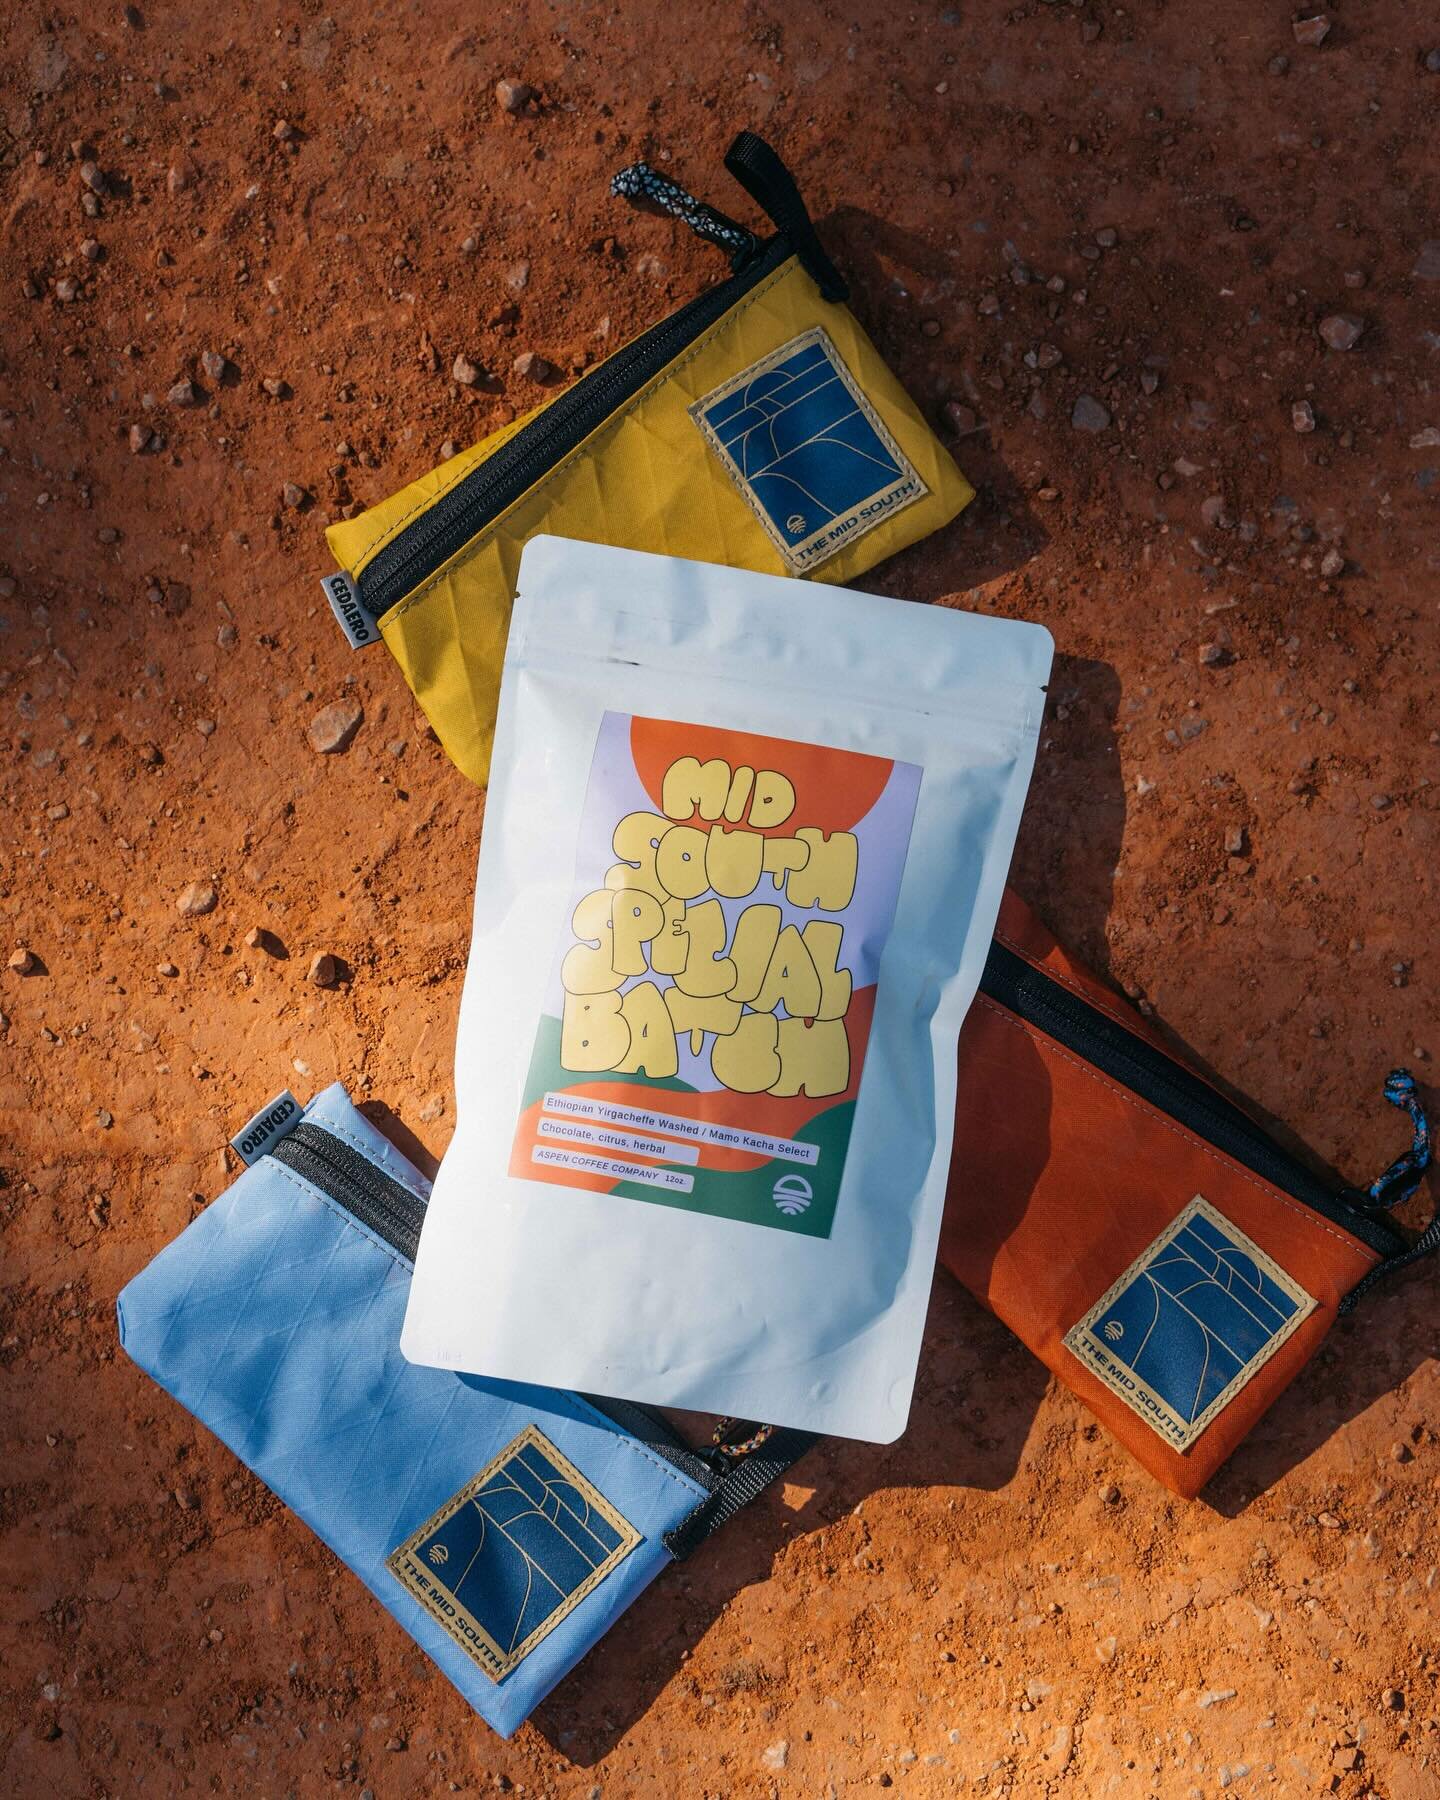 Did you miss out the Special Batch coffee? We have a few more bags left!! Perfectly roasted by our neighbors at Aspen Coffee ☕️
This is an Ethiopian Yirgacheffe Washed, Mamo Kacha Select, with a light roast to hilight the chocolate and citrus in the 